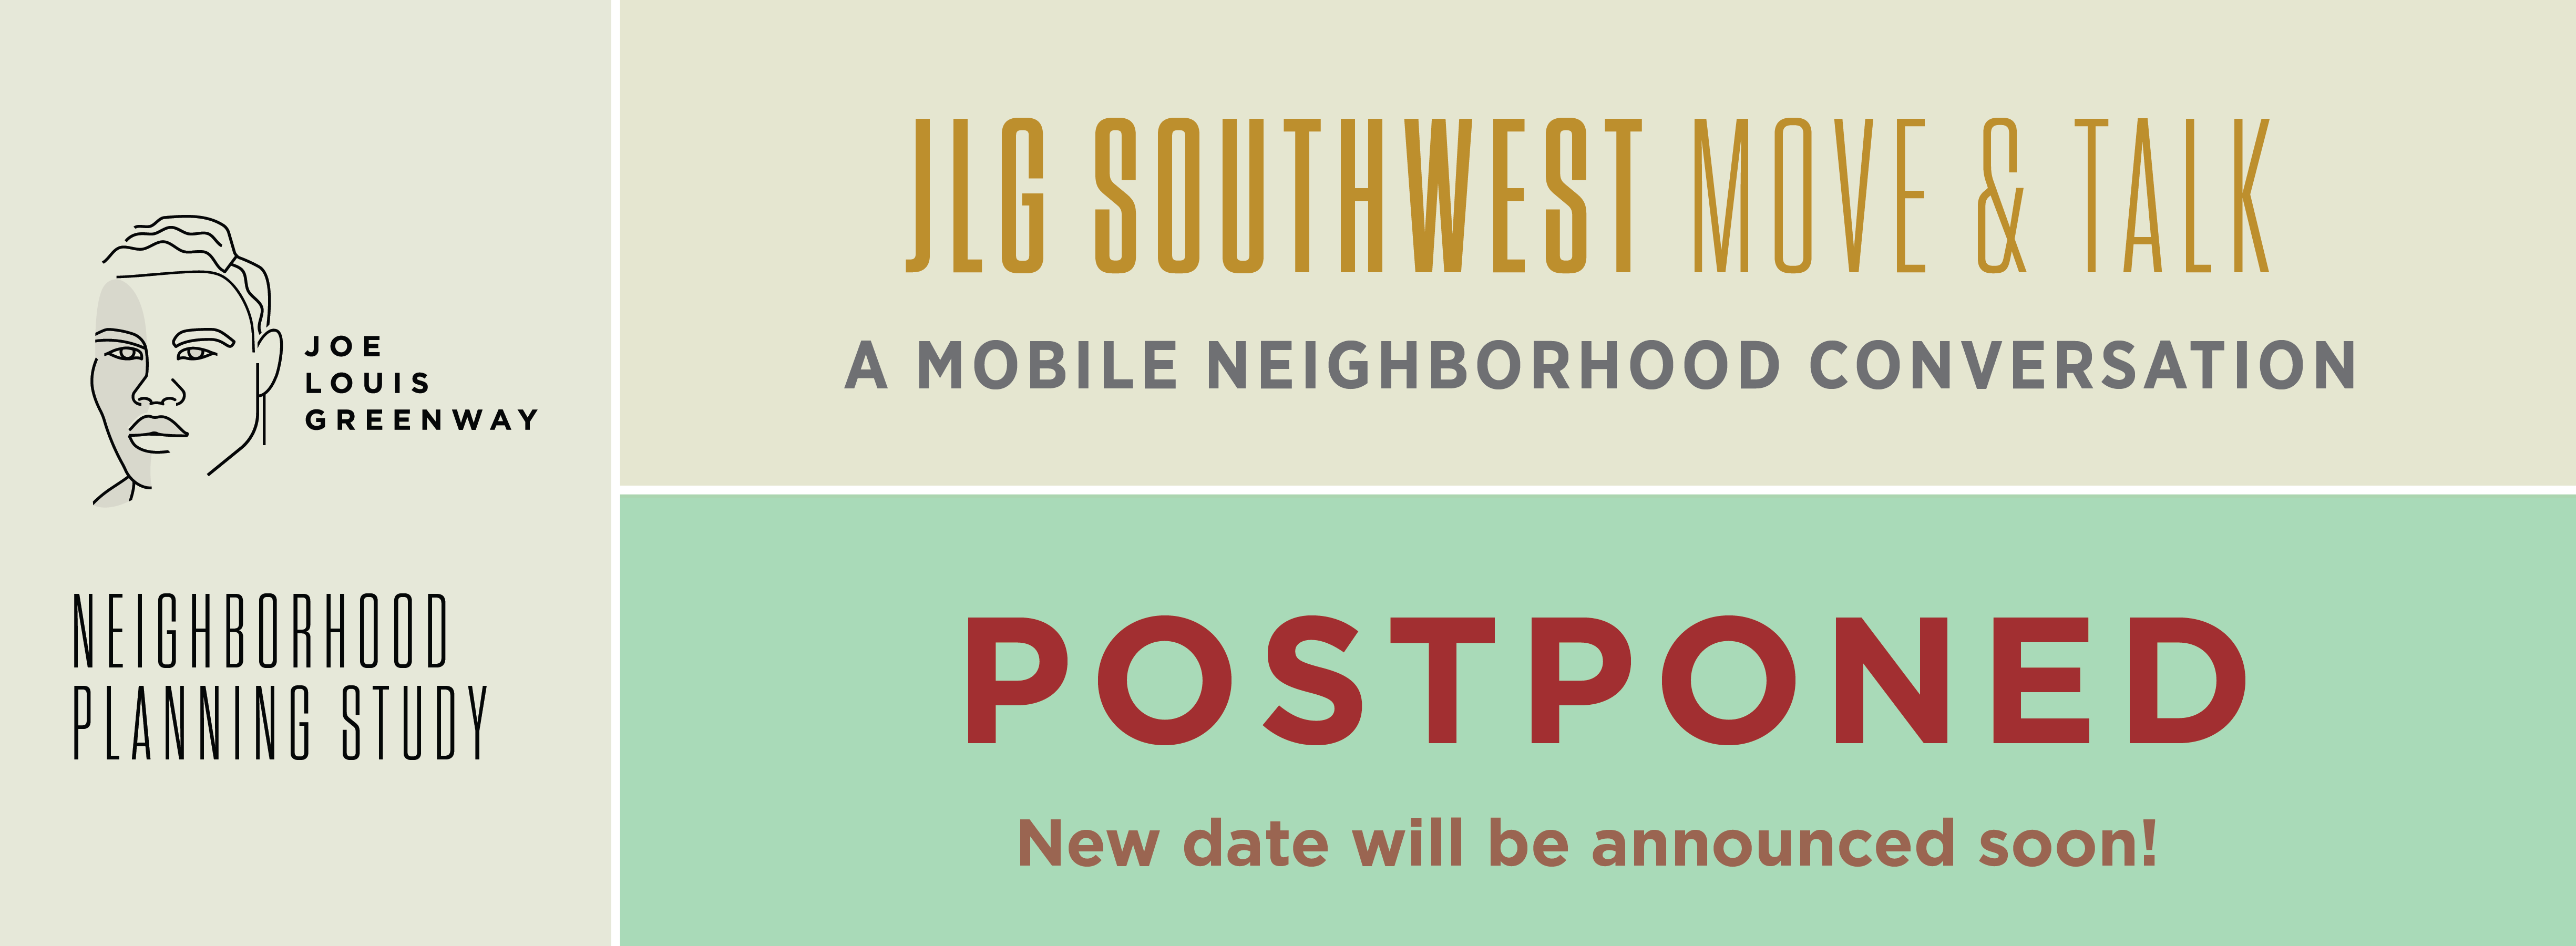 JLG Move and Talk Southwest banner